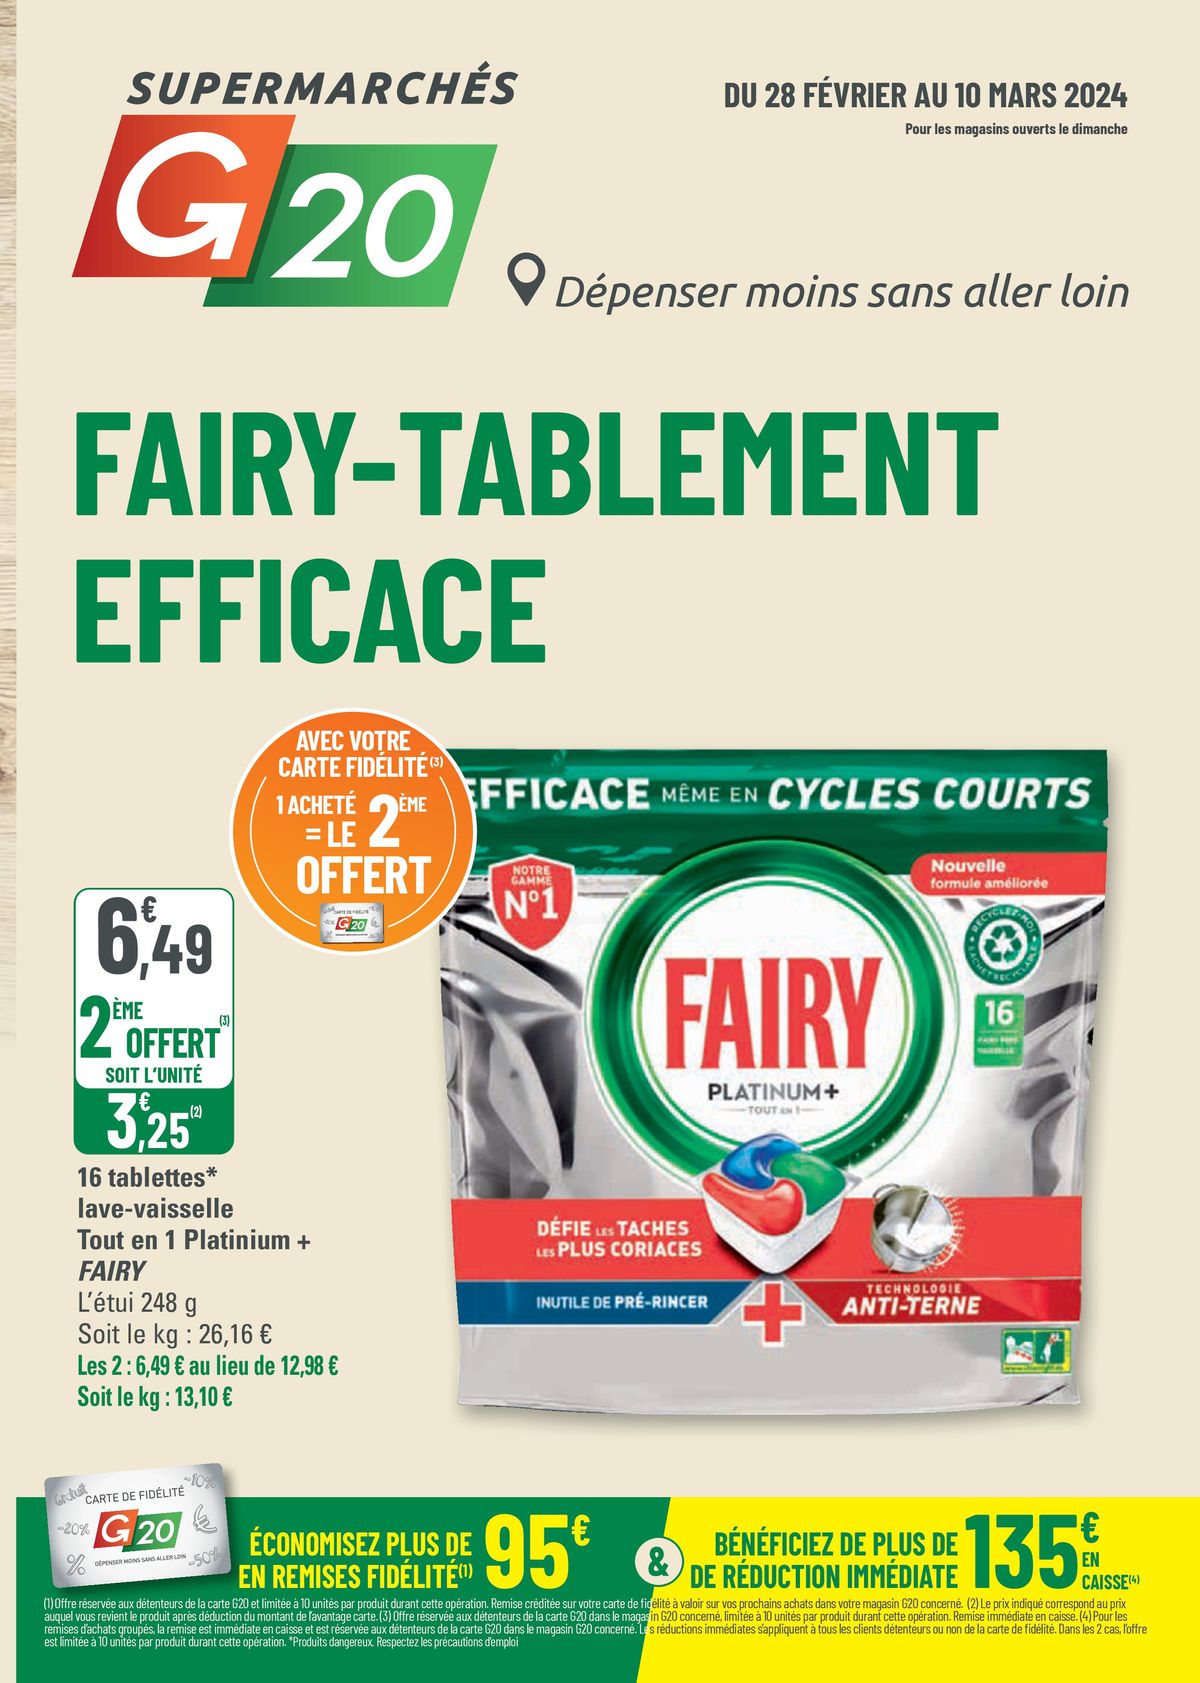 Catalogue  FAIRY-TABLEMENT EFFICACE, page 00001